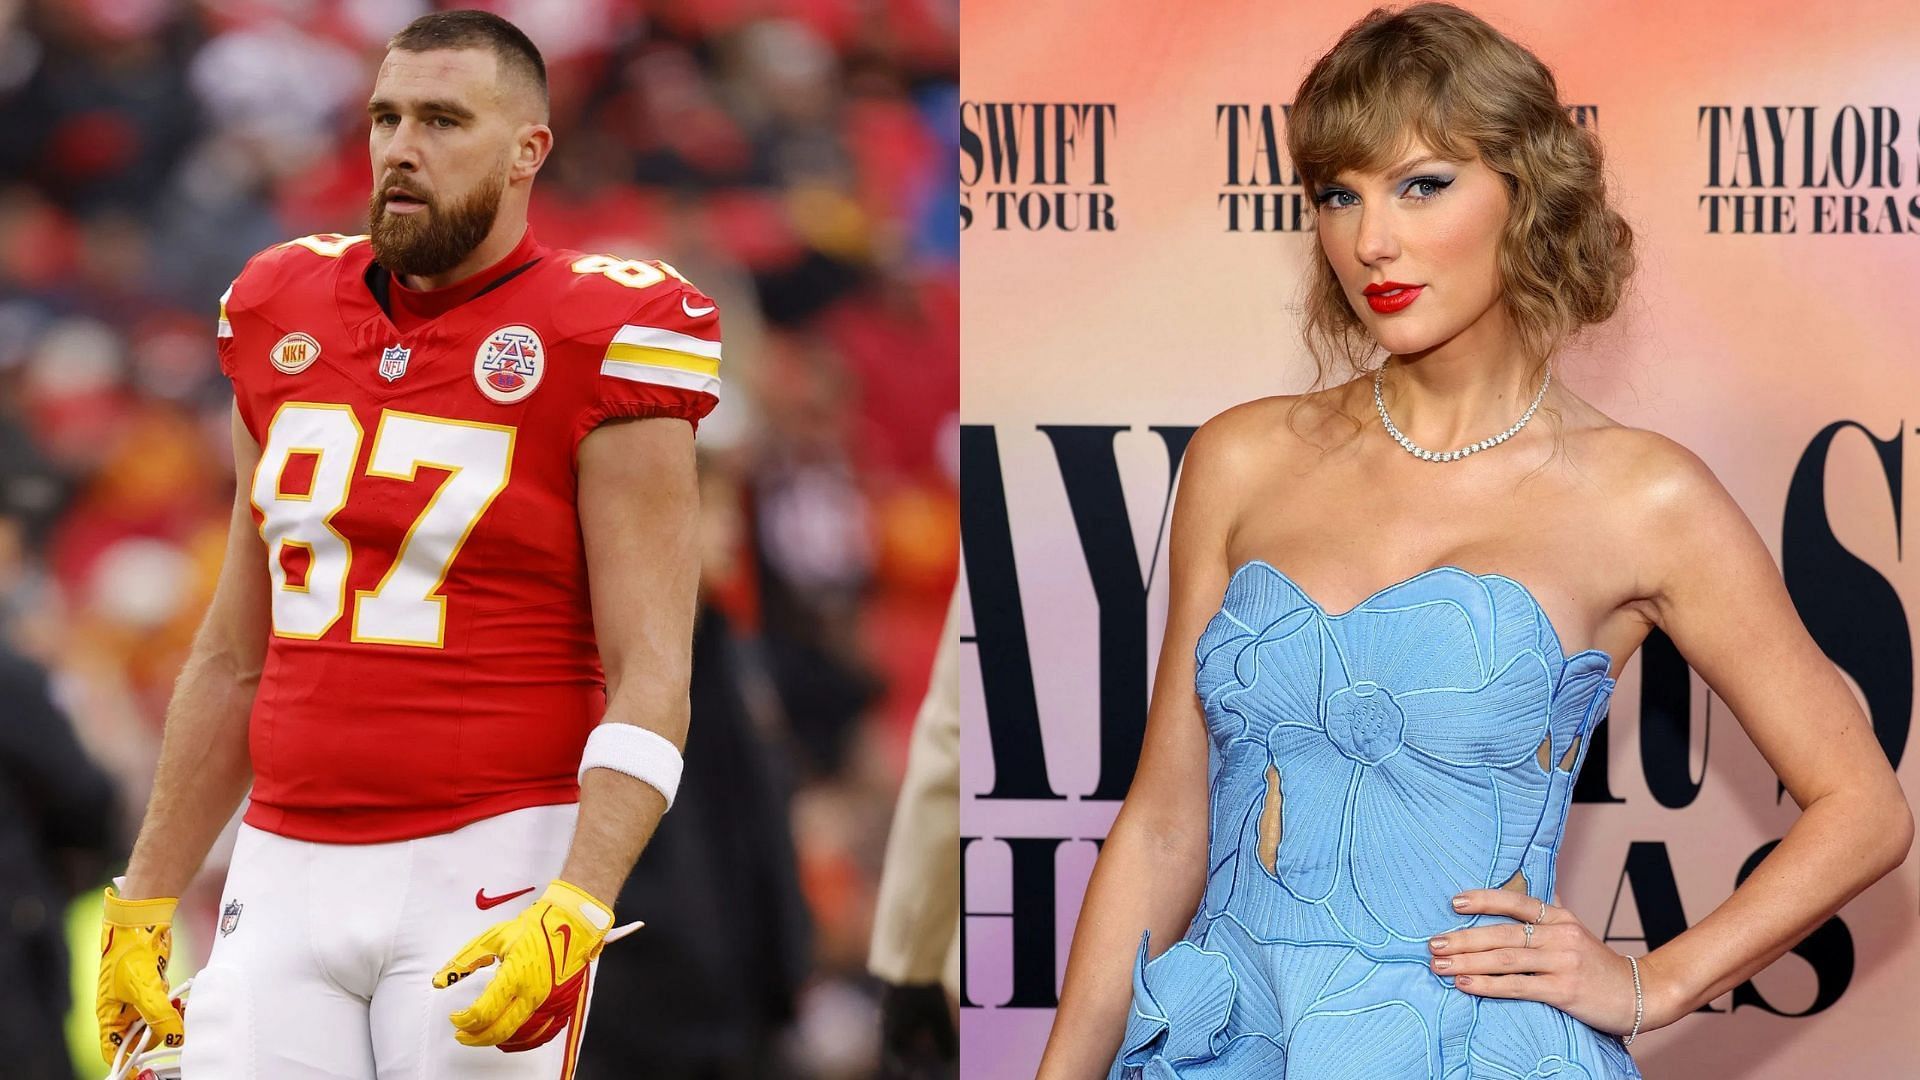 All-Pro tight end Travis Kelce and 12-time Grammy Award winner Taylor Swift